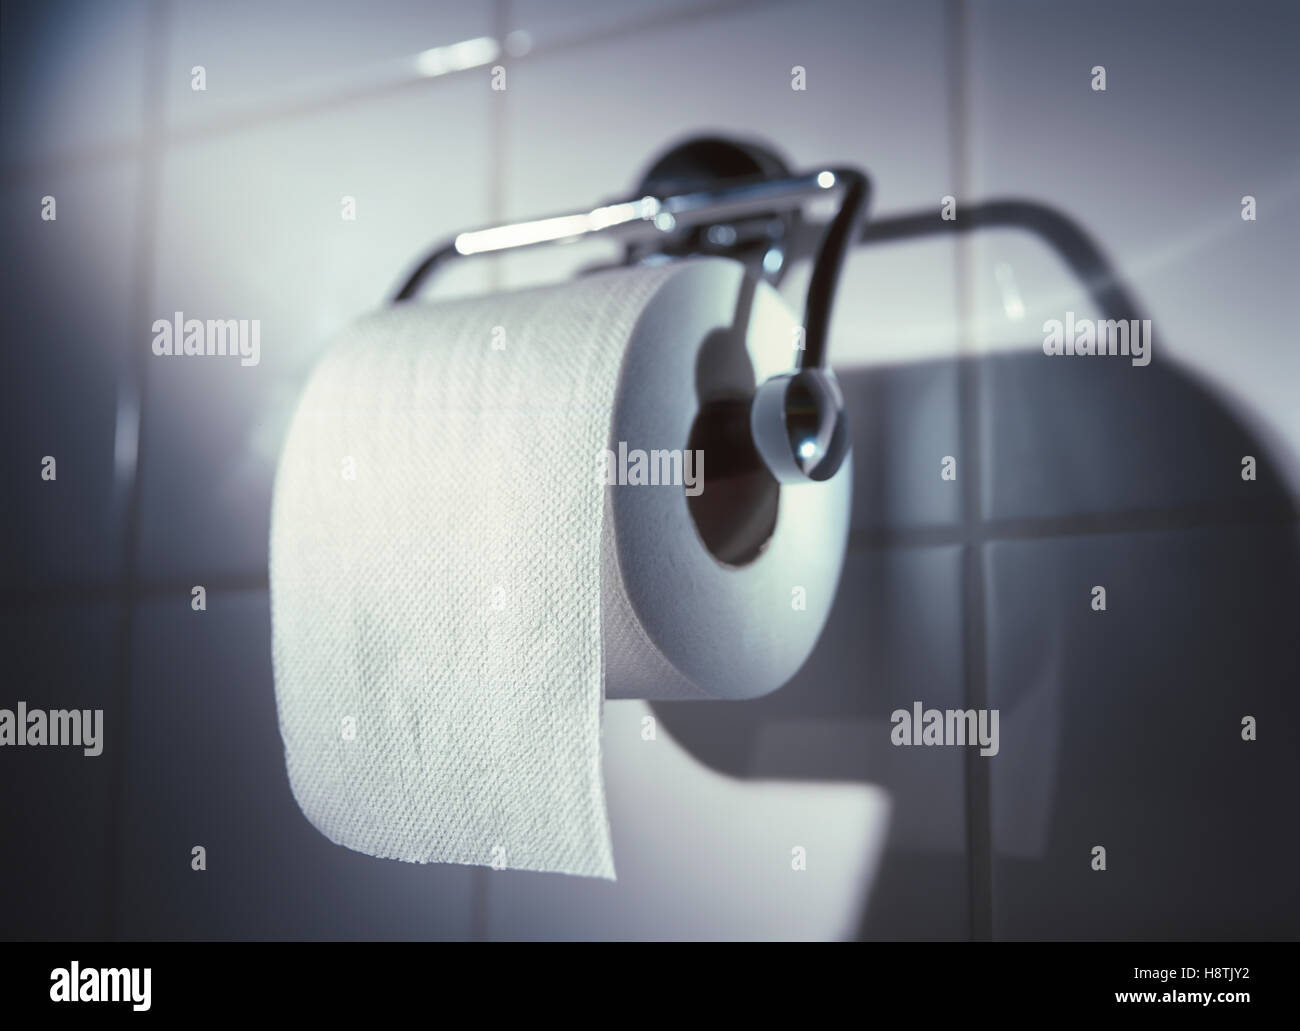 Toilet paper close up Stock Photo